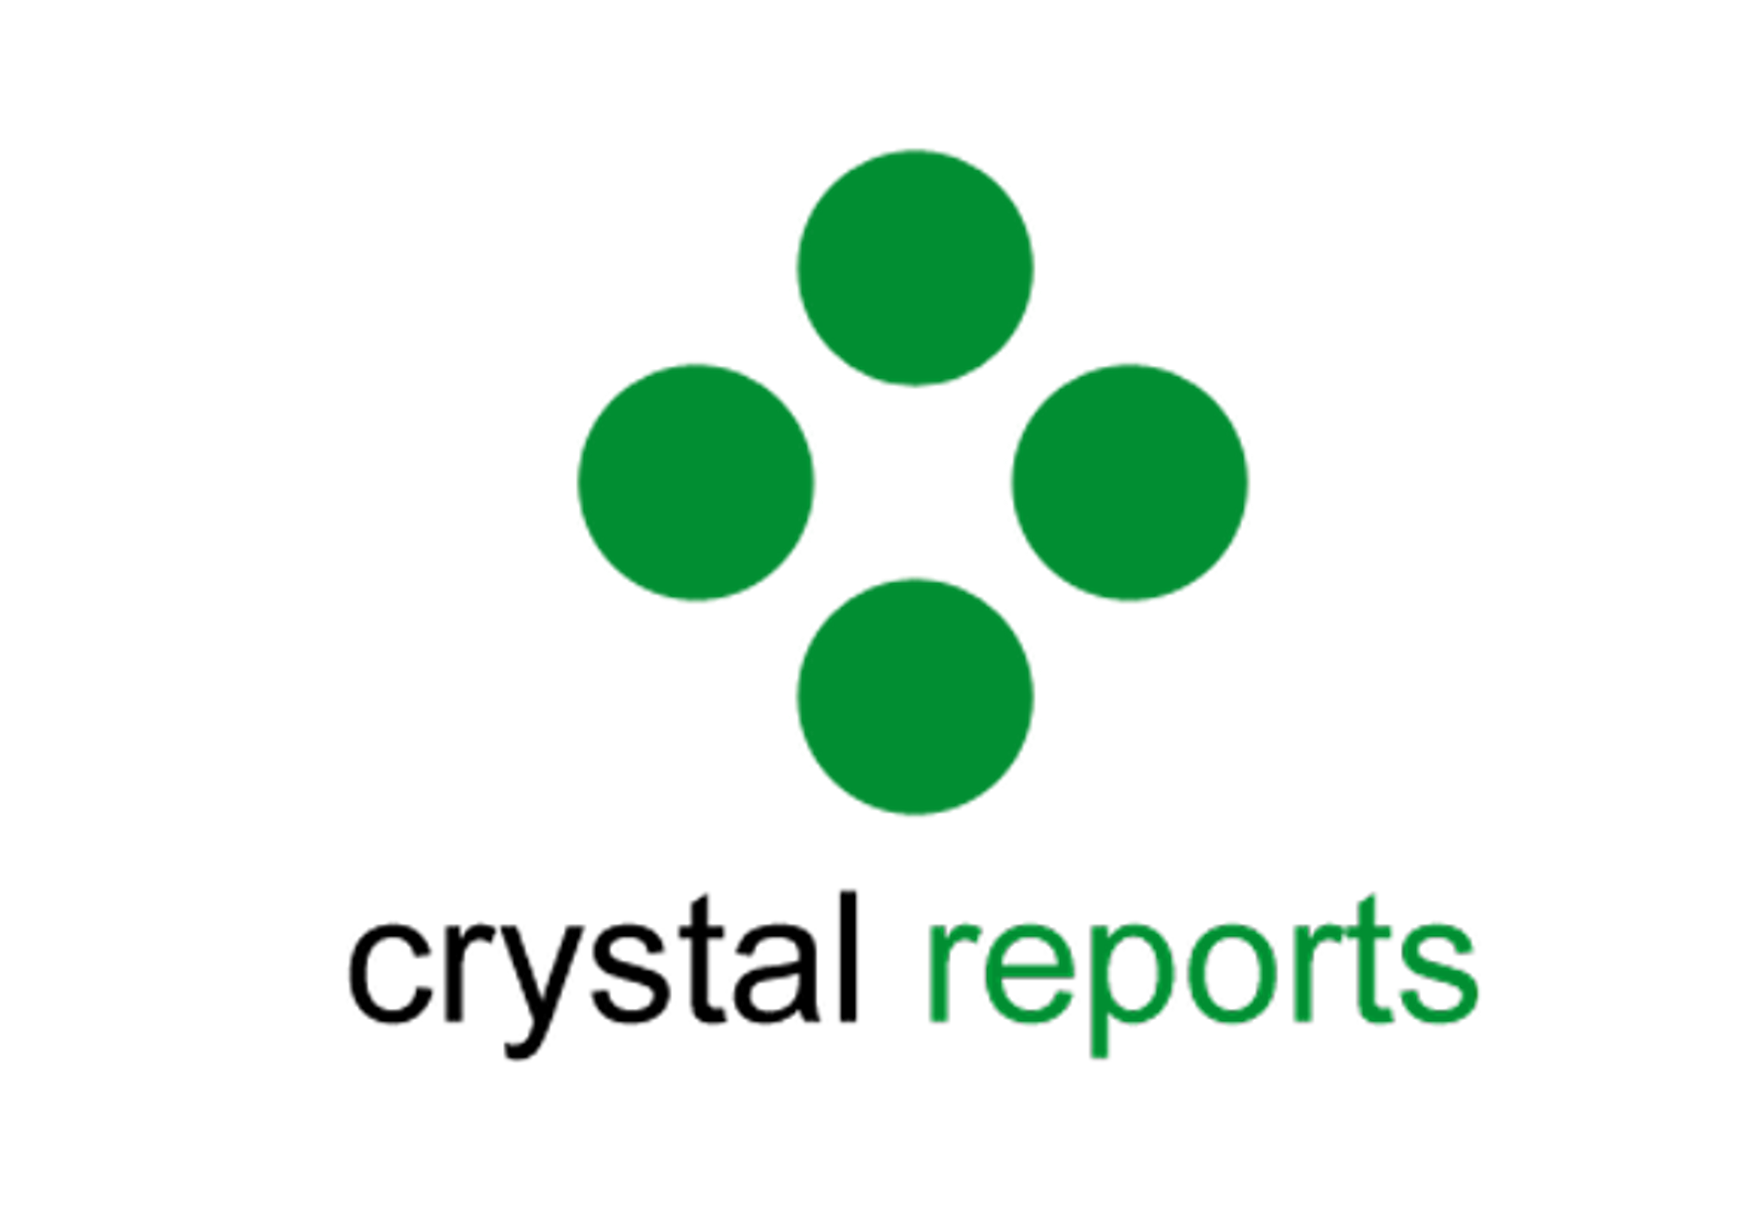  Reportes Reporting Services